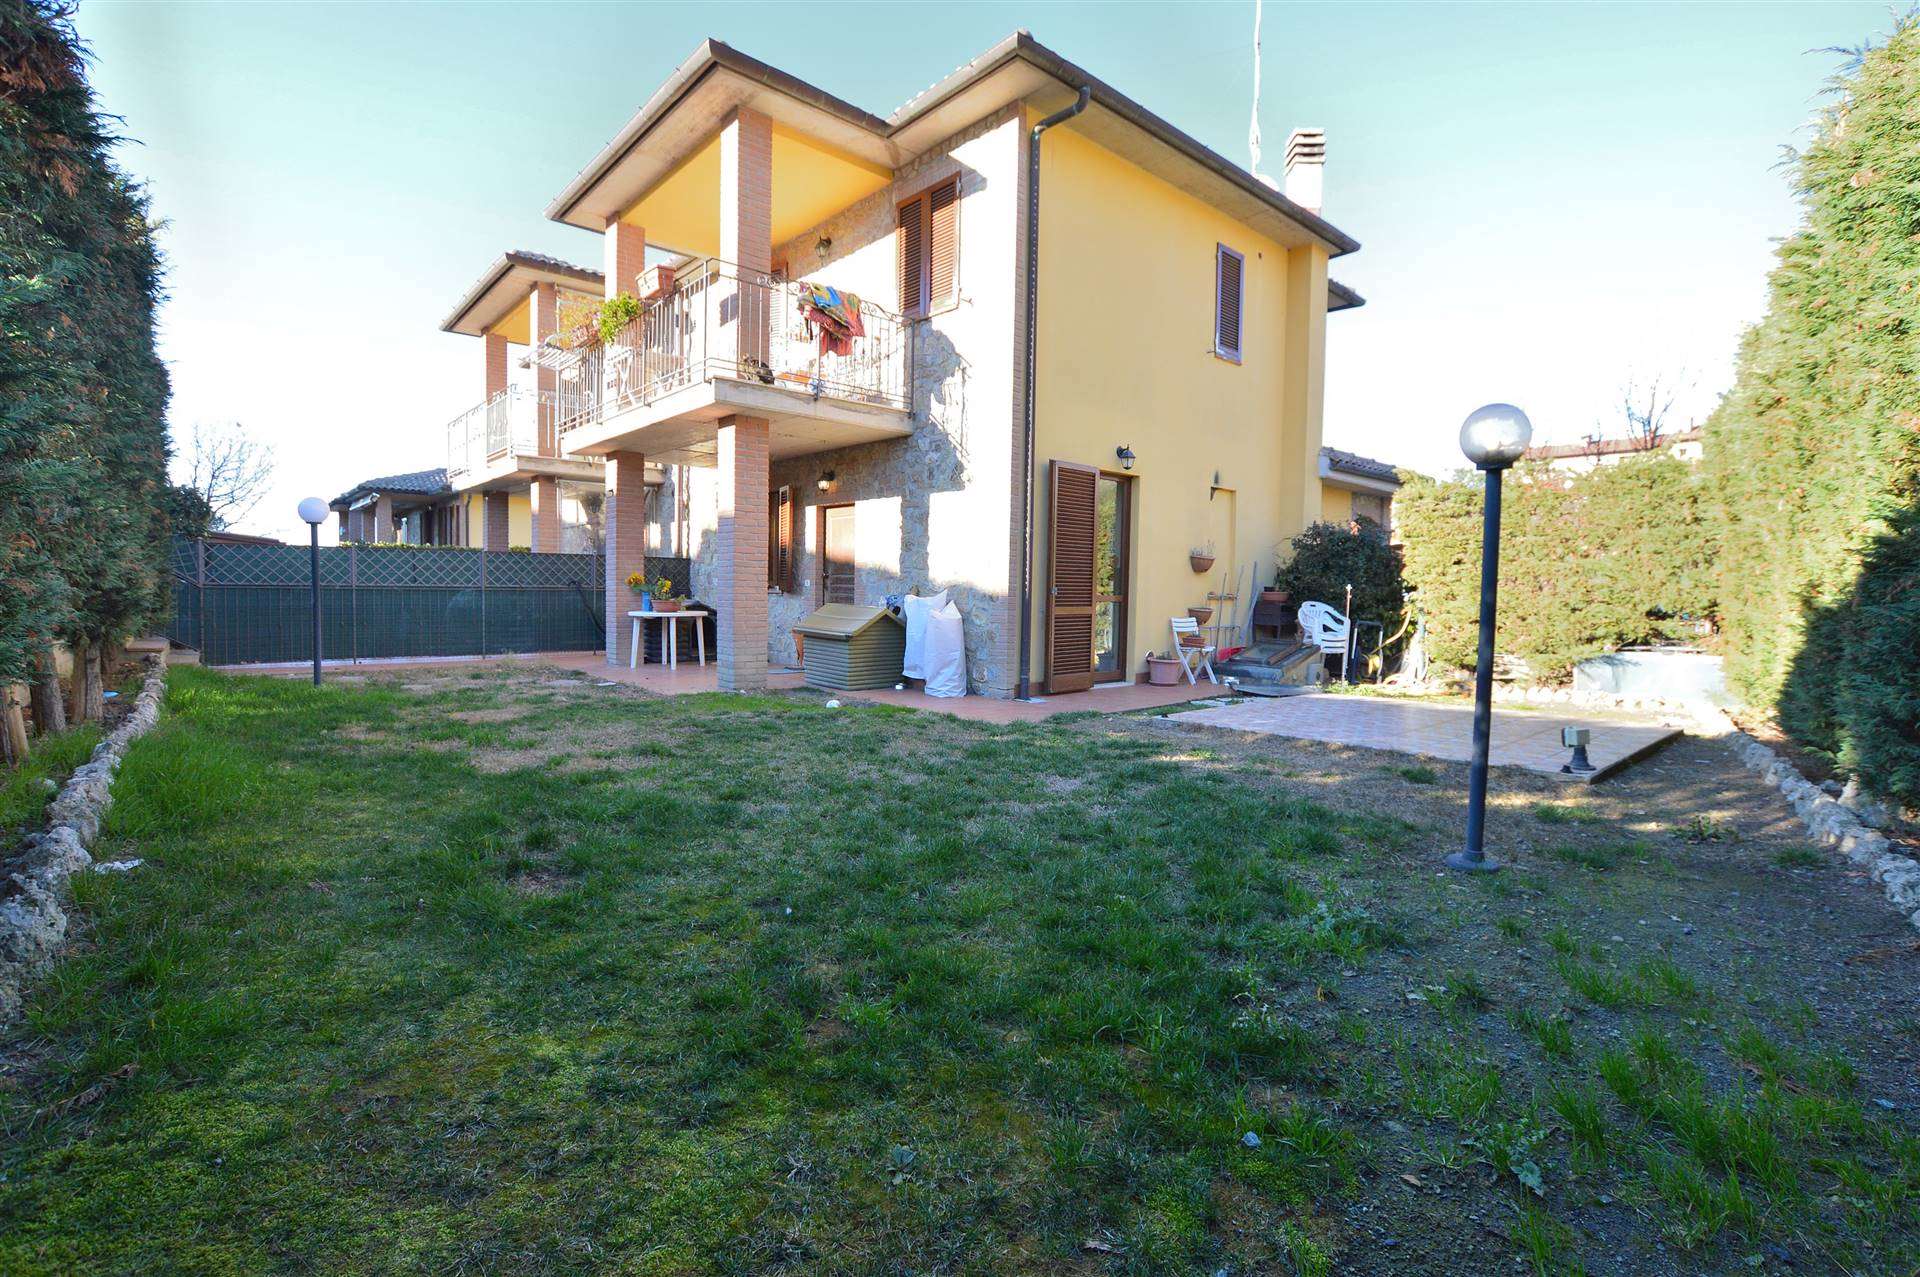 CASCIANO DI MURLO, MURLO, Terraced house for sale of 75 Sq. mt., Excellent Condition, Heating Individual heating system, Energetic class: G, Epi: 175 kwh/m2 year, placed at Ground on 1, composed by: 